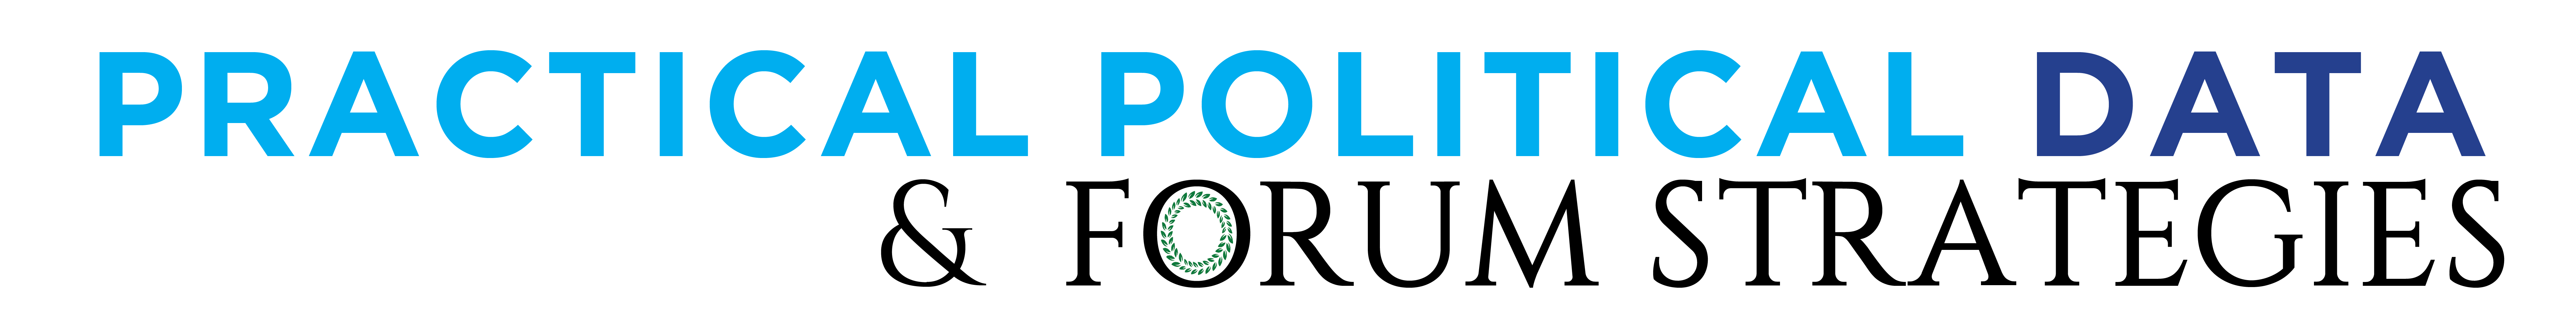 PPD _ FORUM Combined Logo